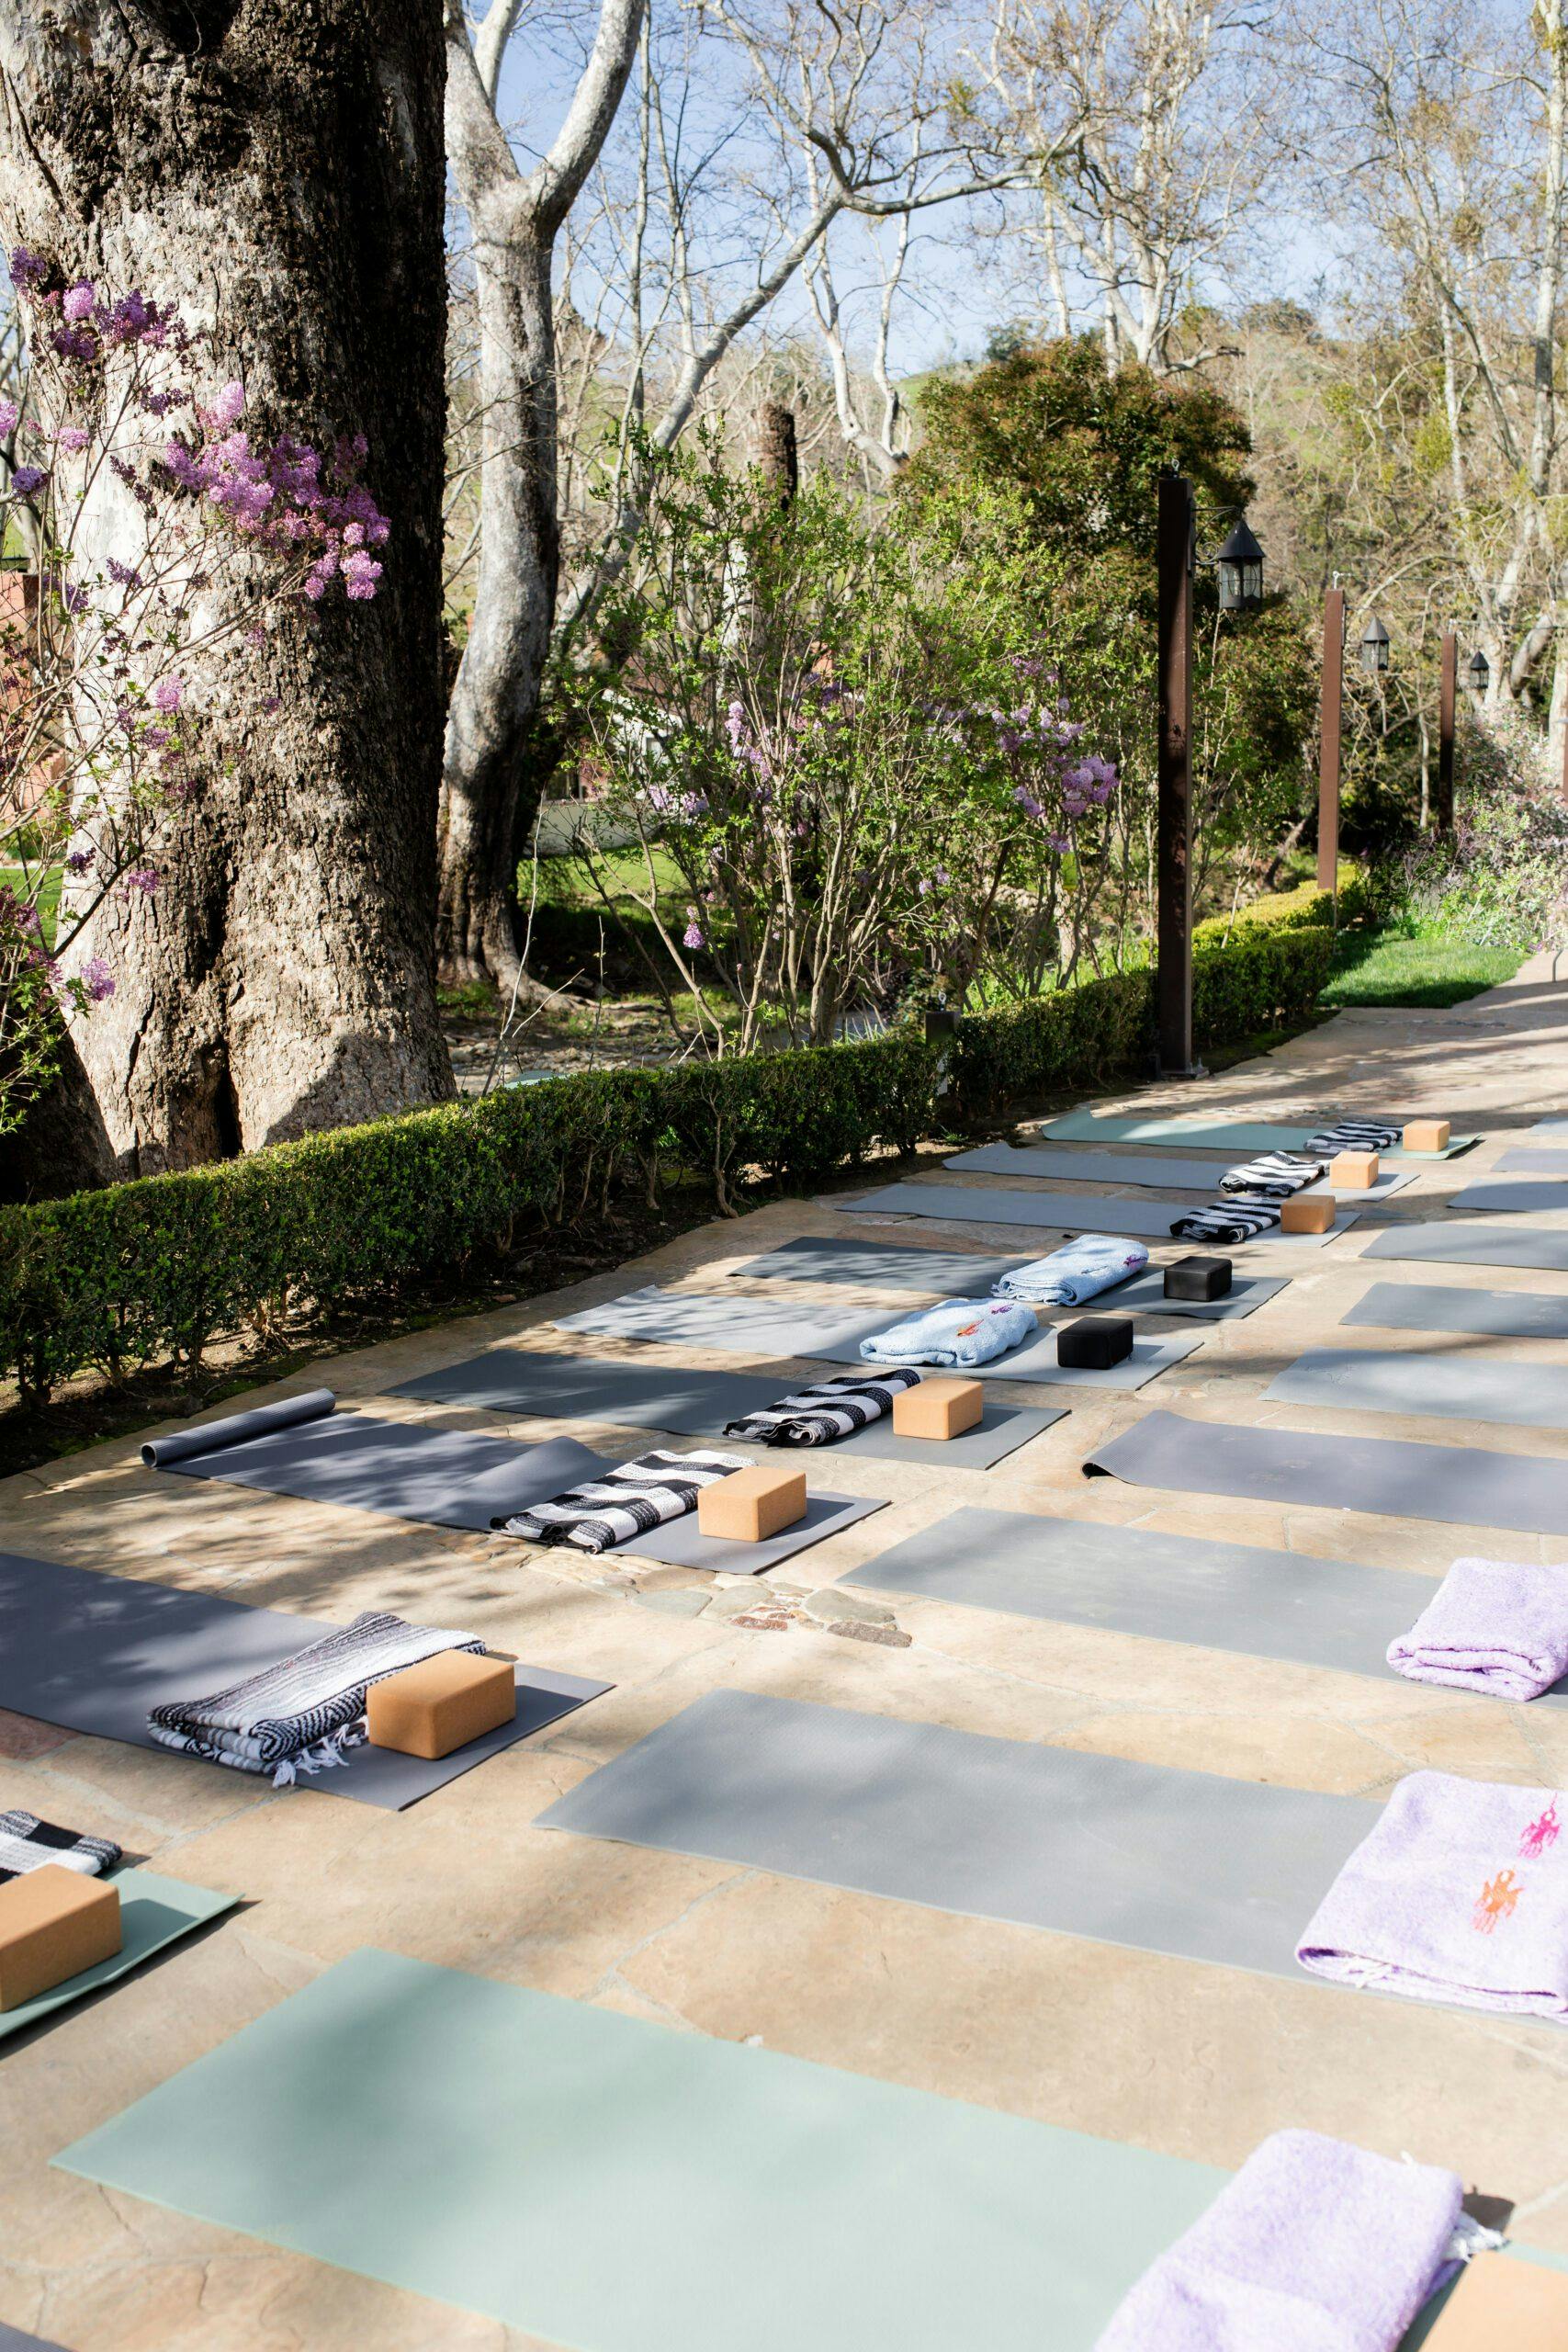 outdoor yoga setup for a group of people